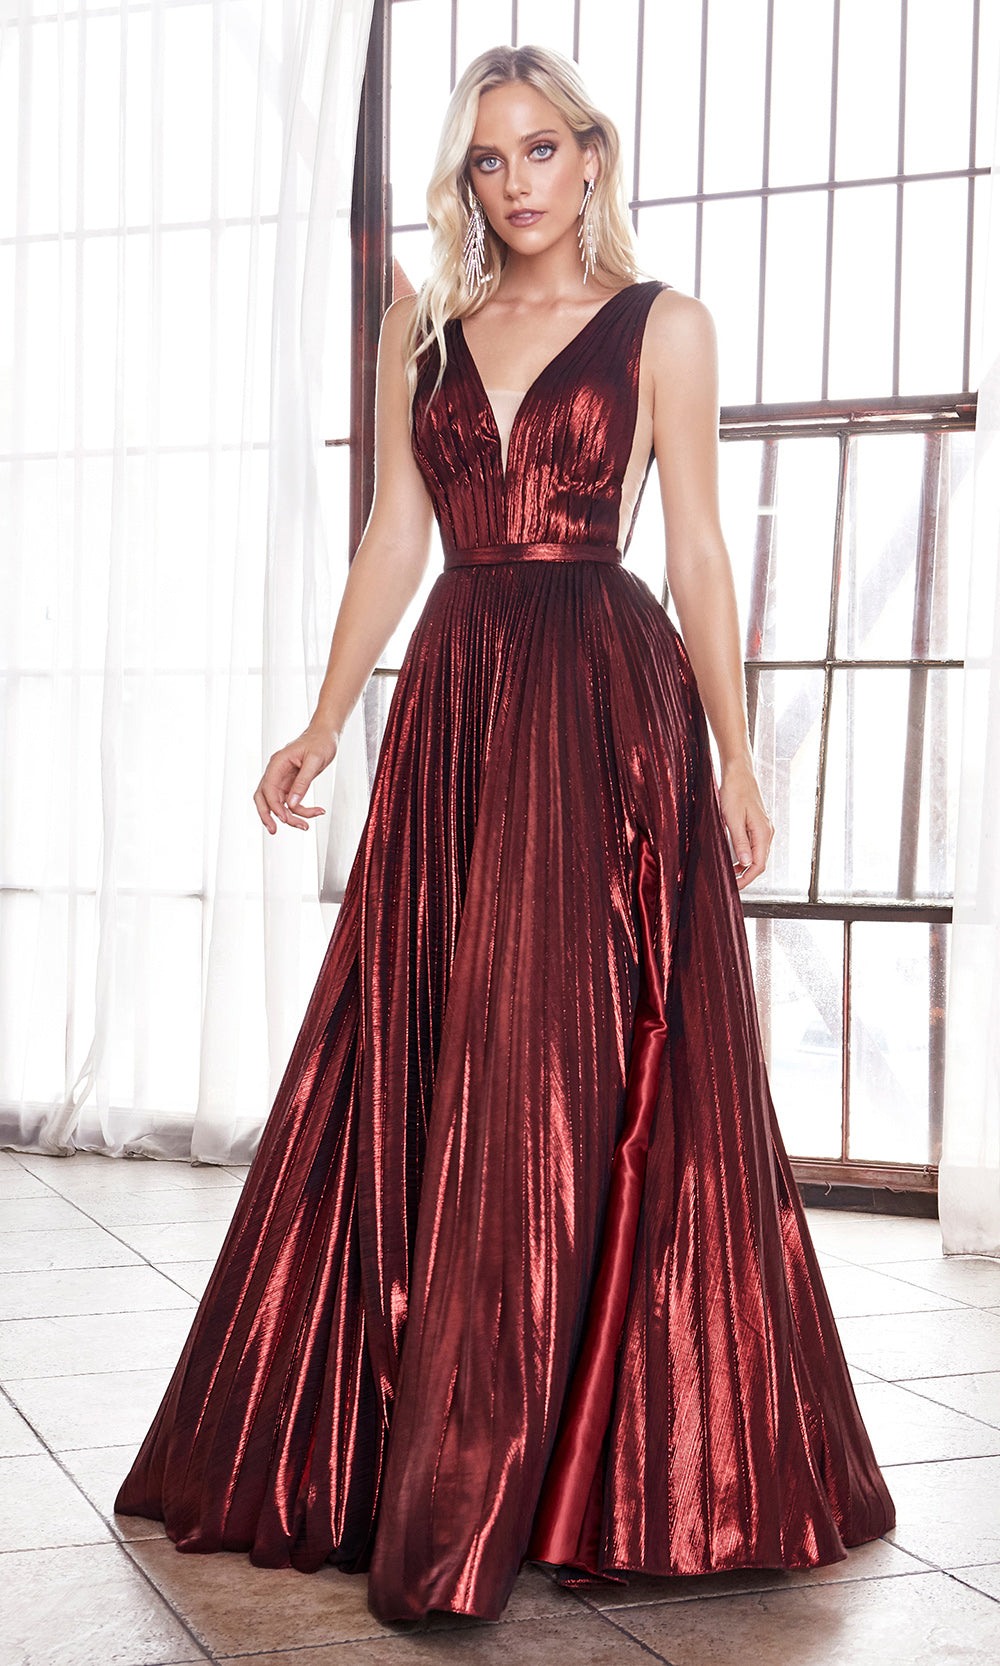 Cinderella Divine CD160 burgundy red v neck simple dress w/empire waist & wide straps. Perfect dark red dress for prom, bridesmaid dress, formal party dress. Plus sizes avail.jpg